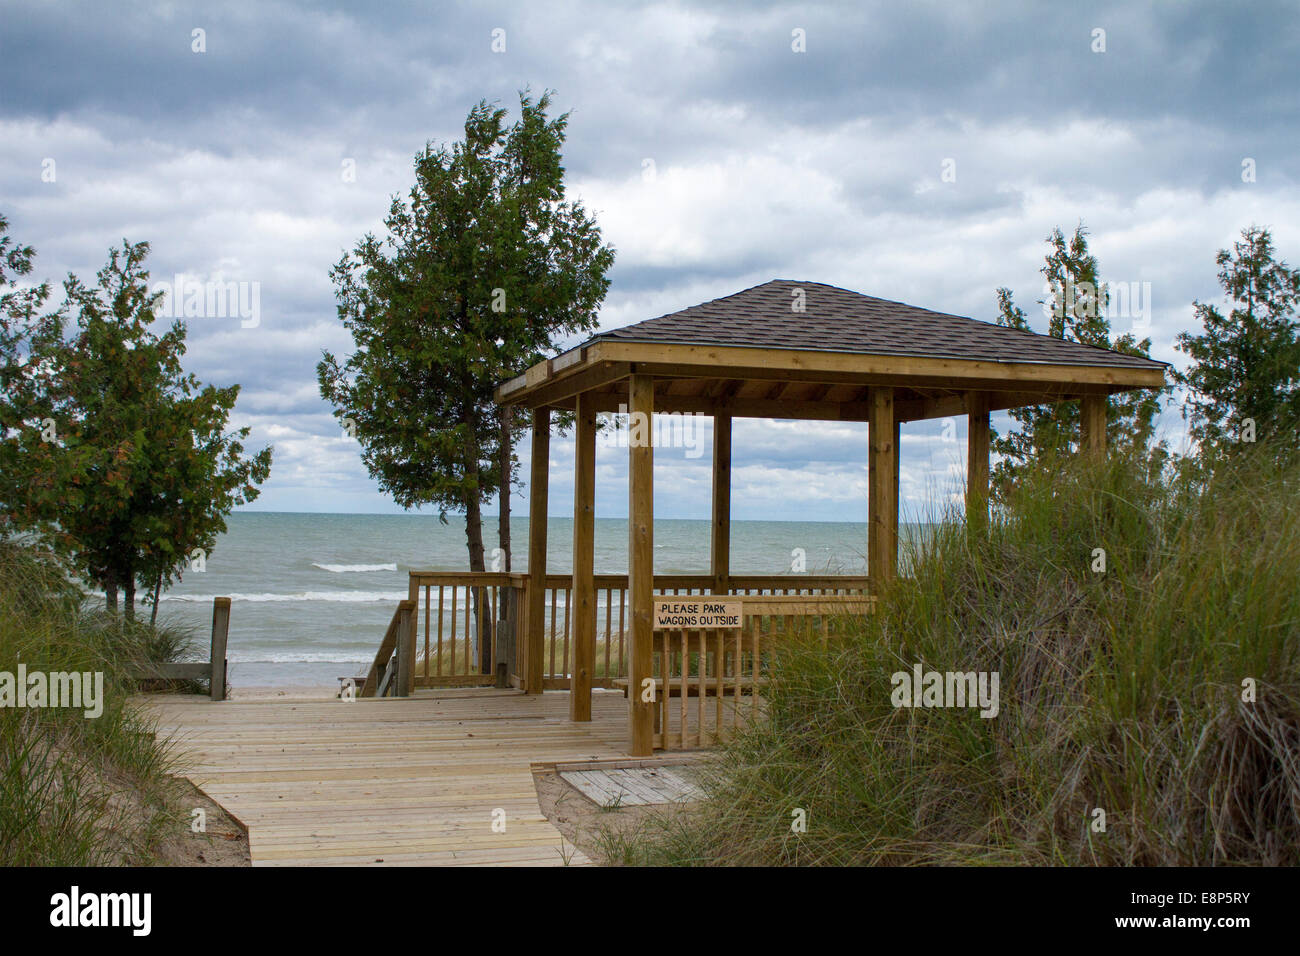 Gazebo on deck overlooking Lake Huron on a cloudy day in Grand Bend, Ontario, Canada Stock Photo